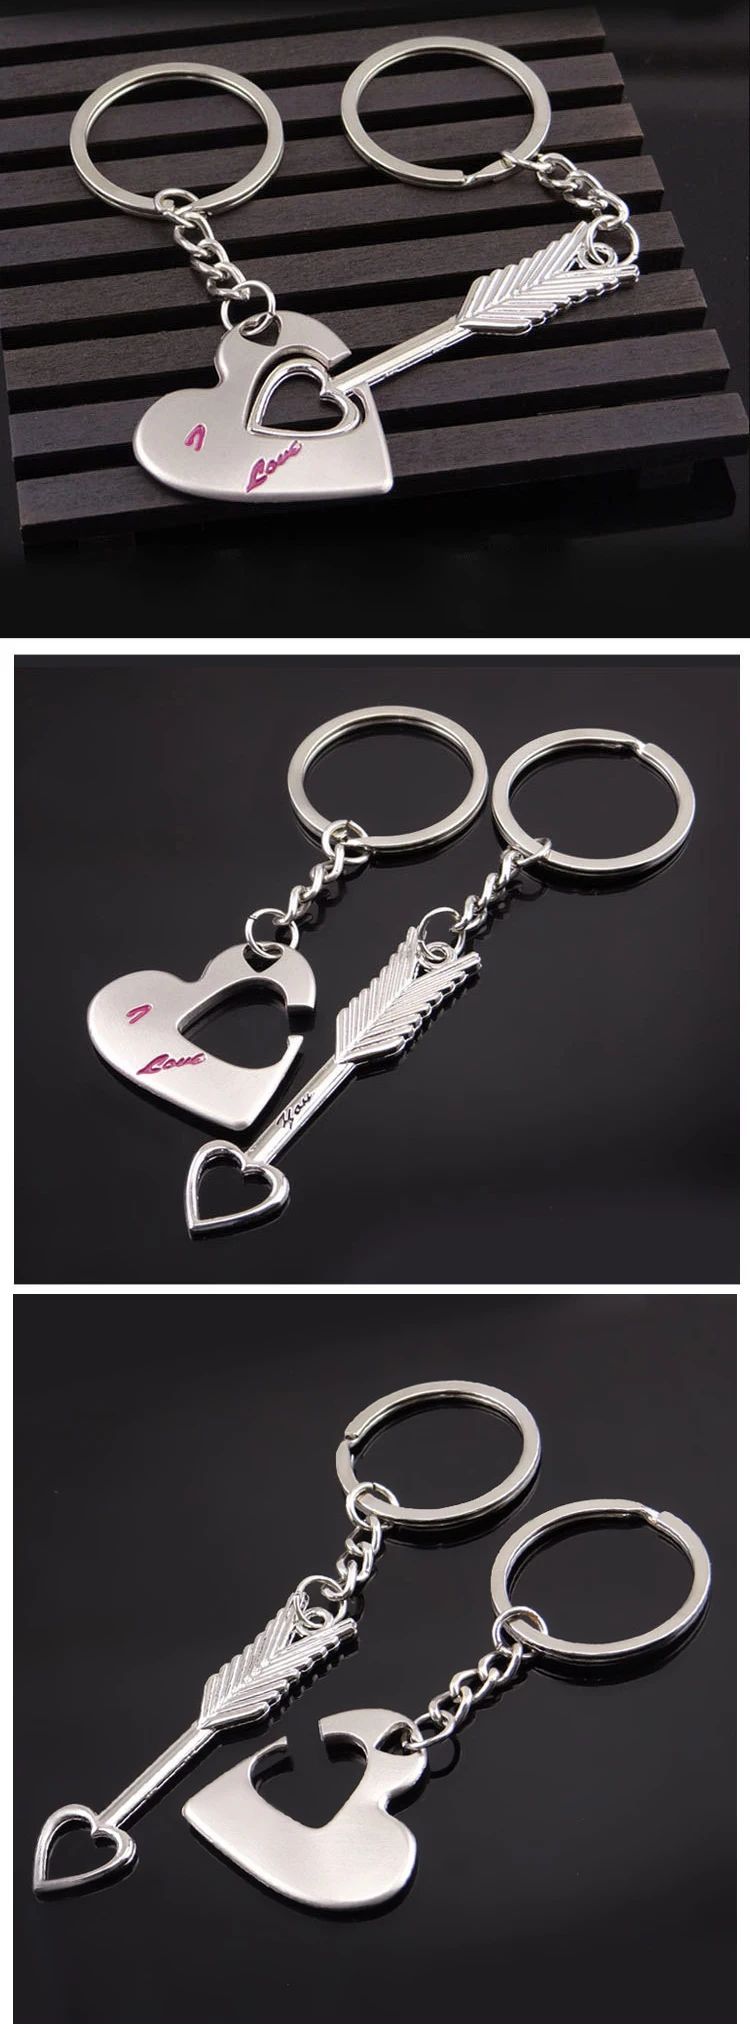 Naomi Sell Lots of Cupid's Arrow Through Mood Couple Keychains Couple Chinese Gift of Key Chain